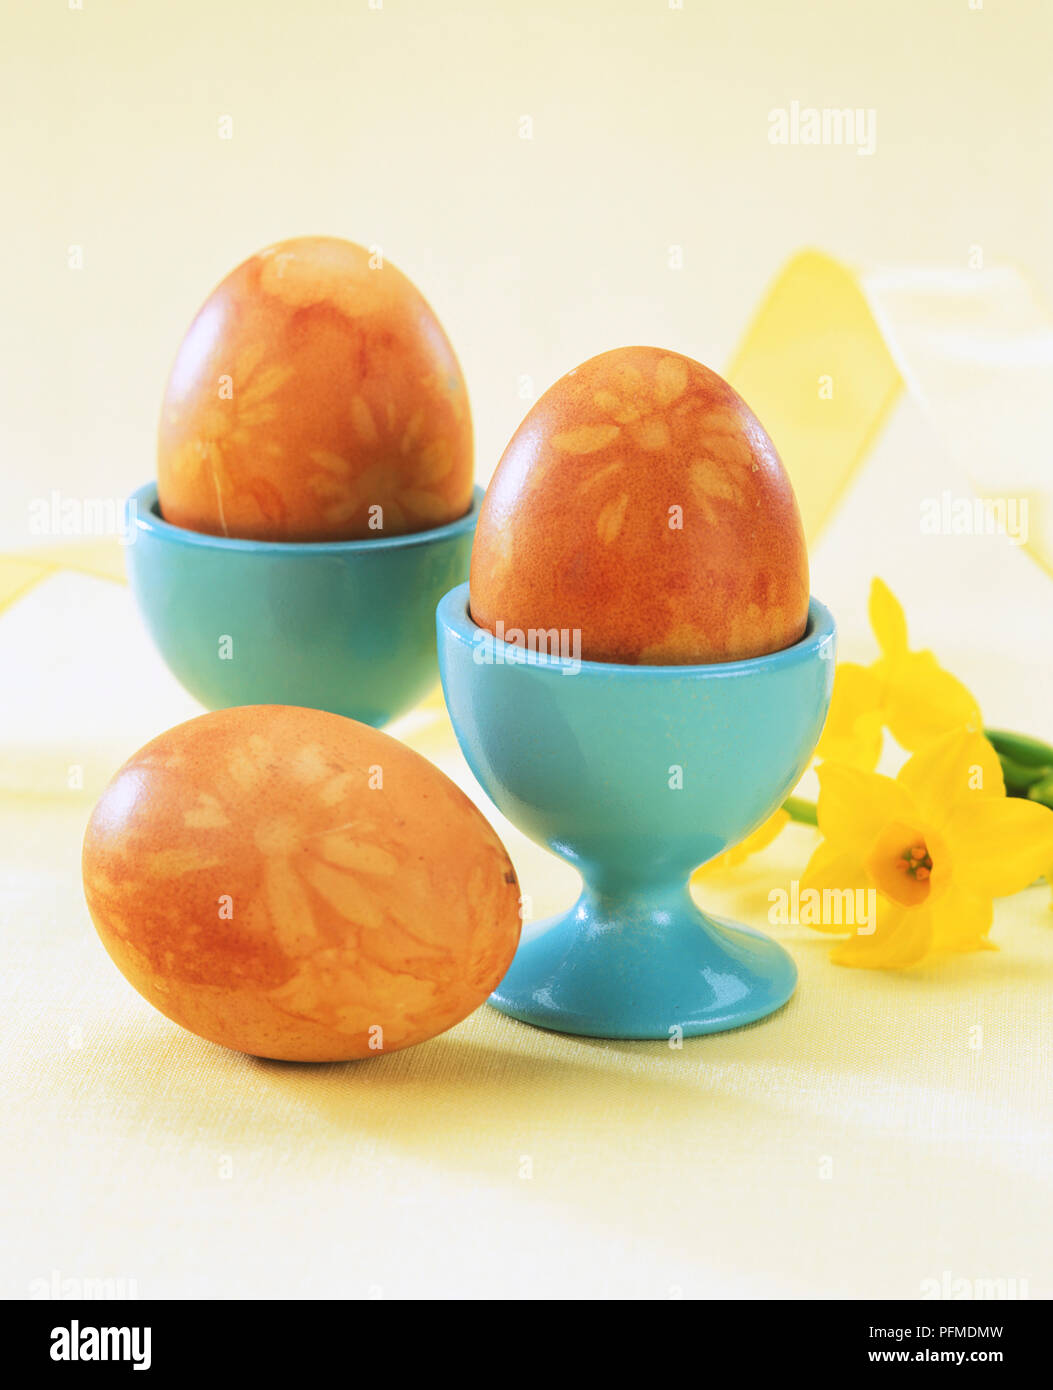 Eggs in eggcups stained with a flower design. Stock Photo